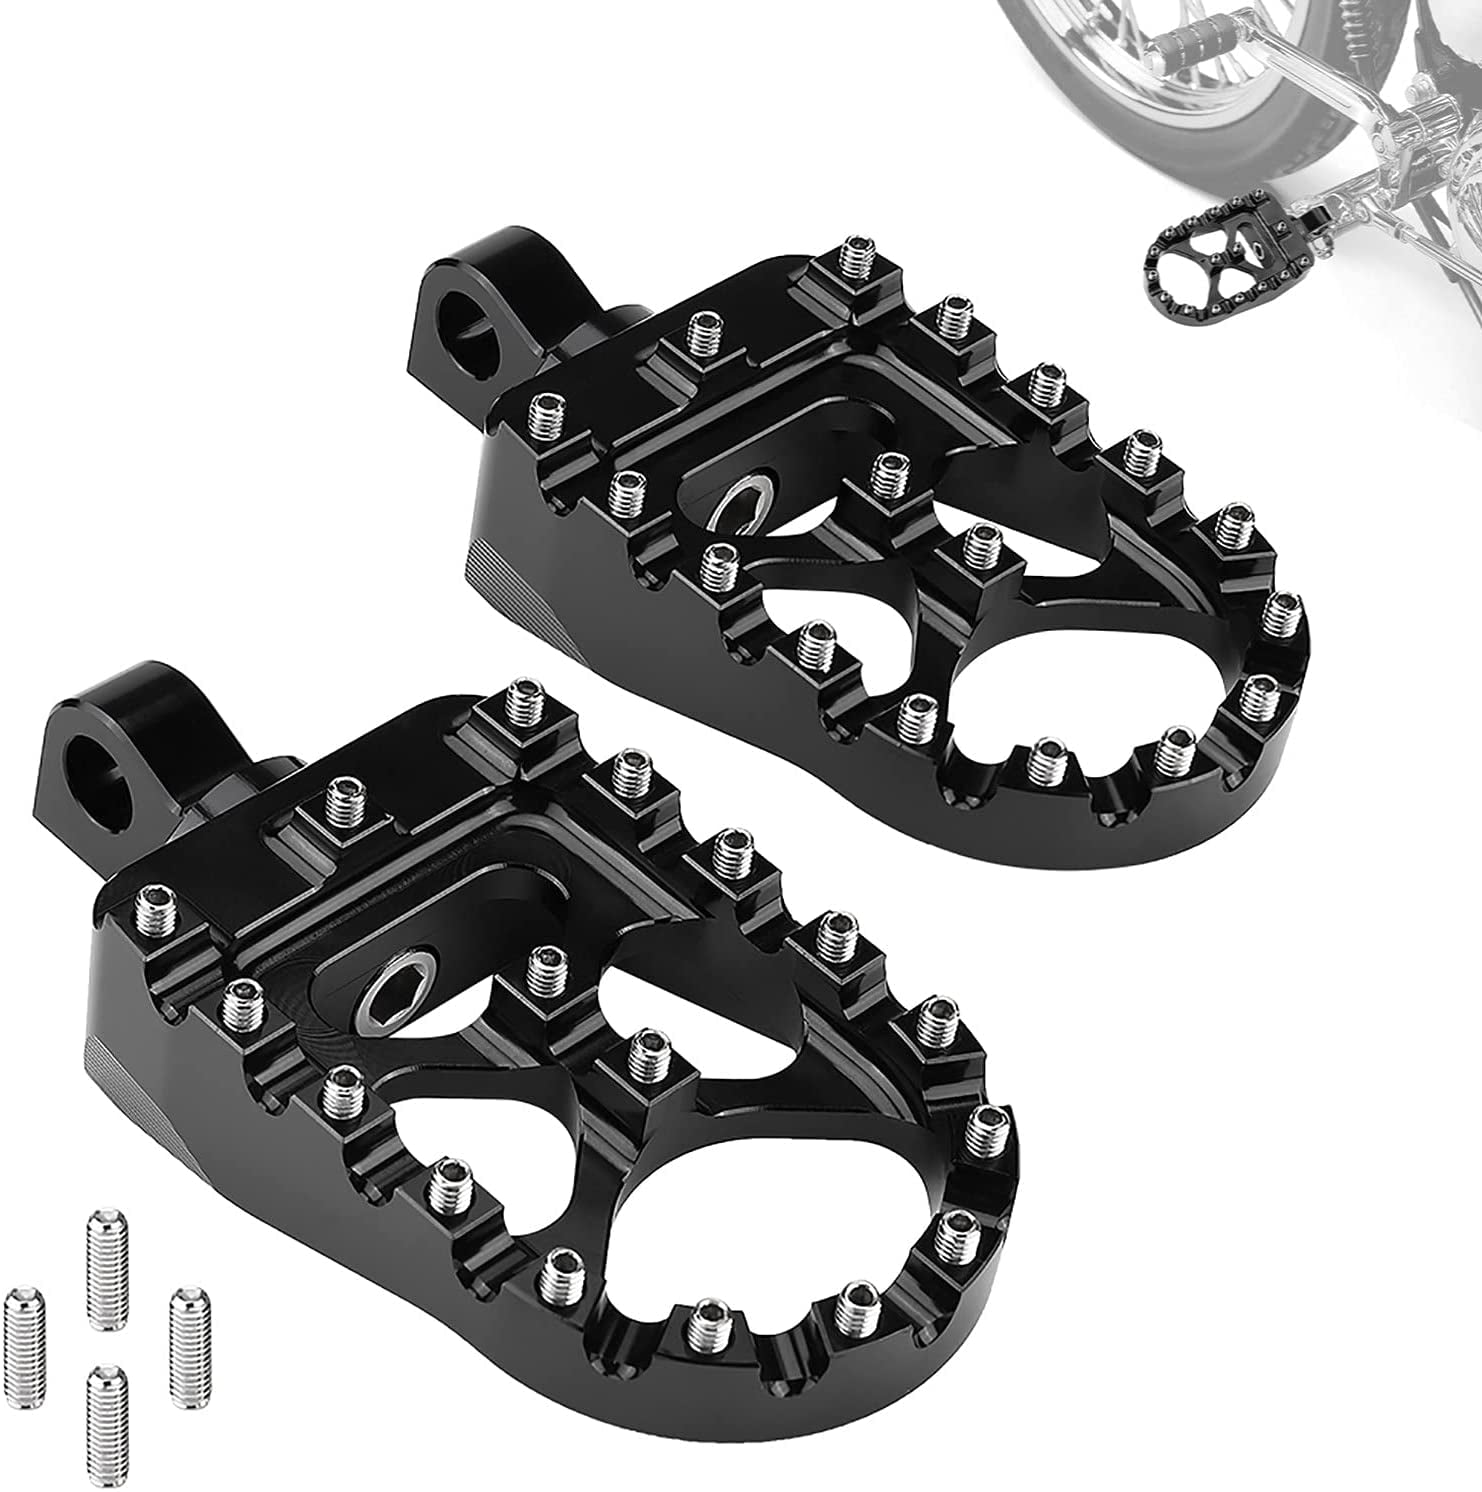 Wide Fat Foot Pegs MX Style Footpegs for Harley Dyna Sportster XL Bobber Black 